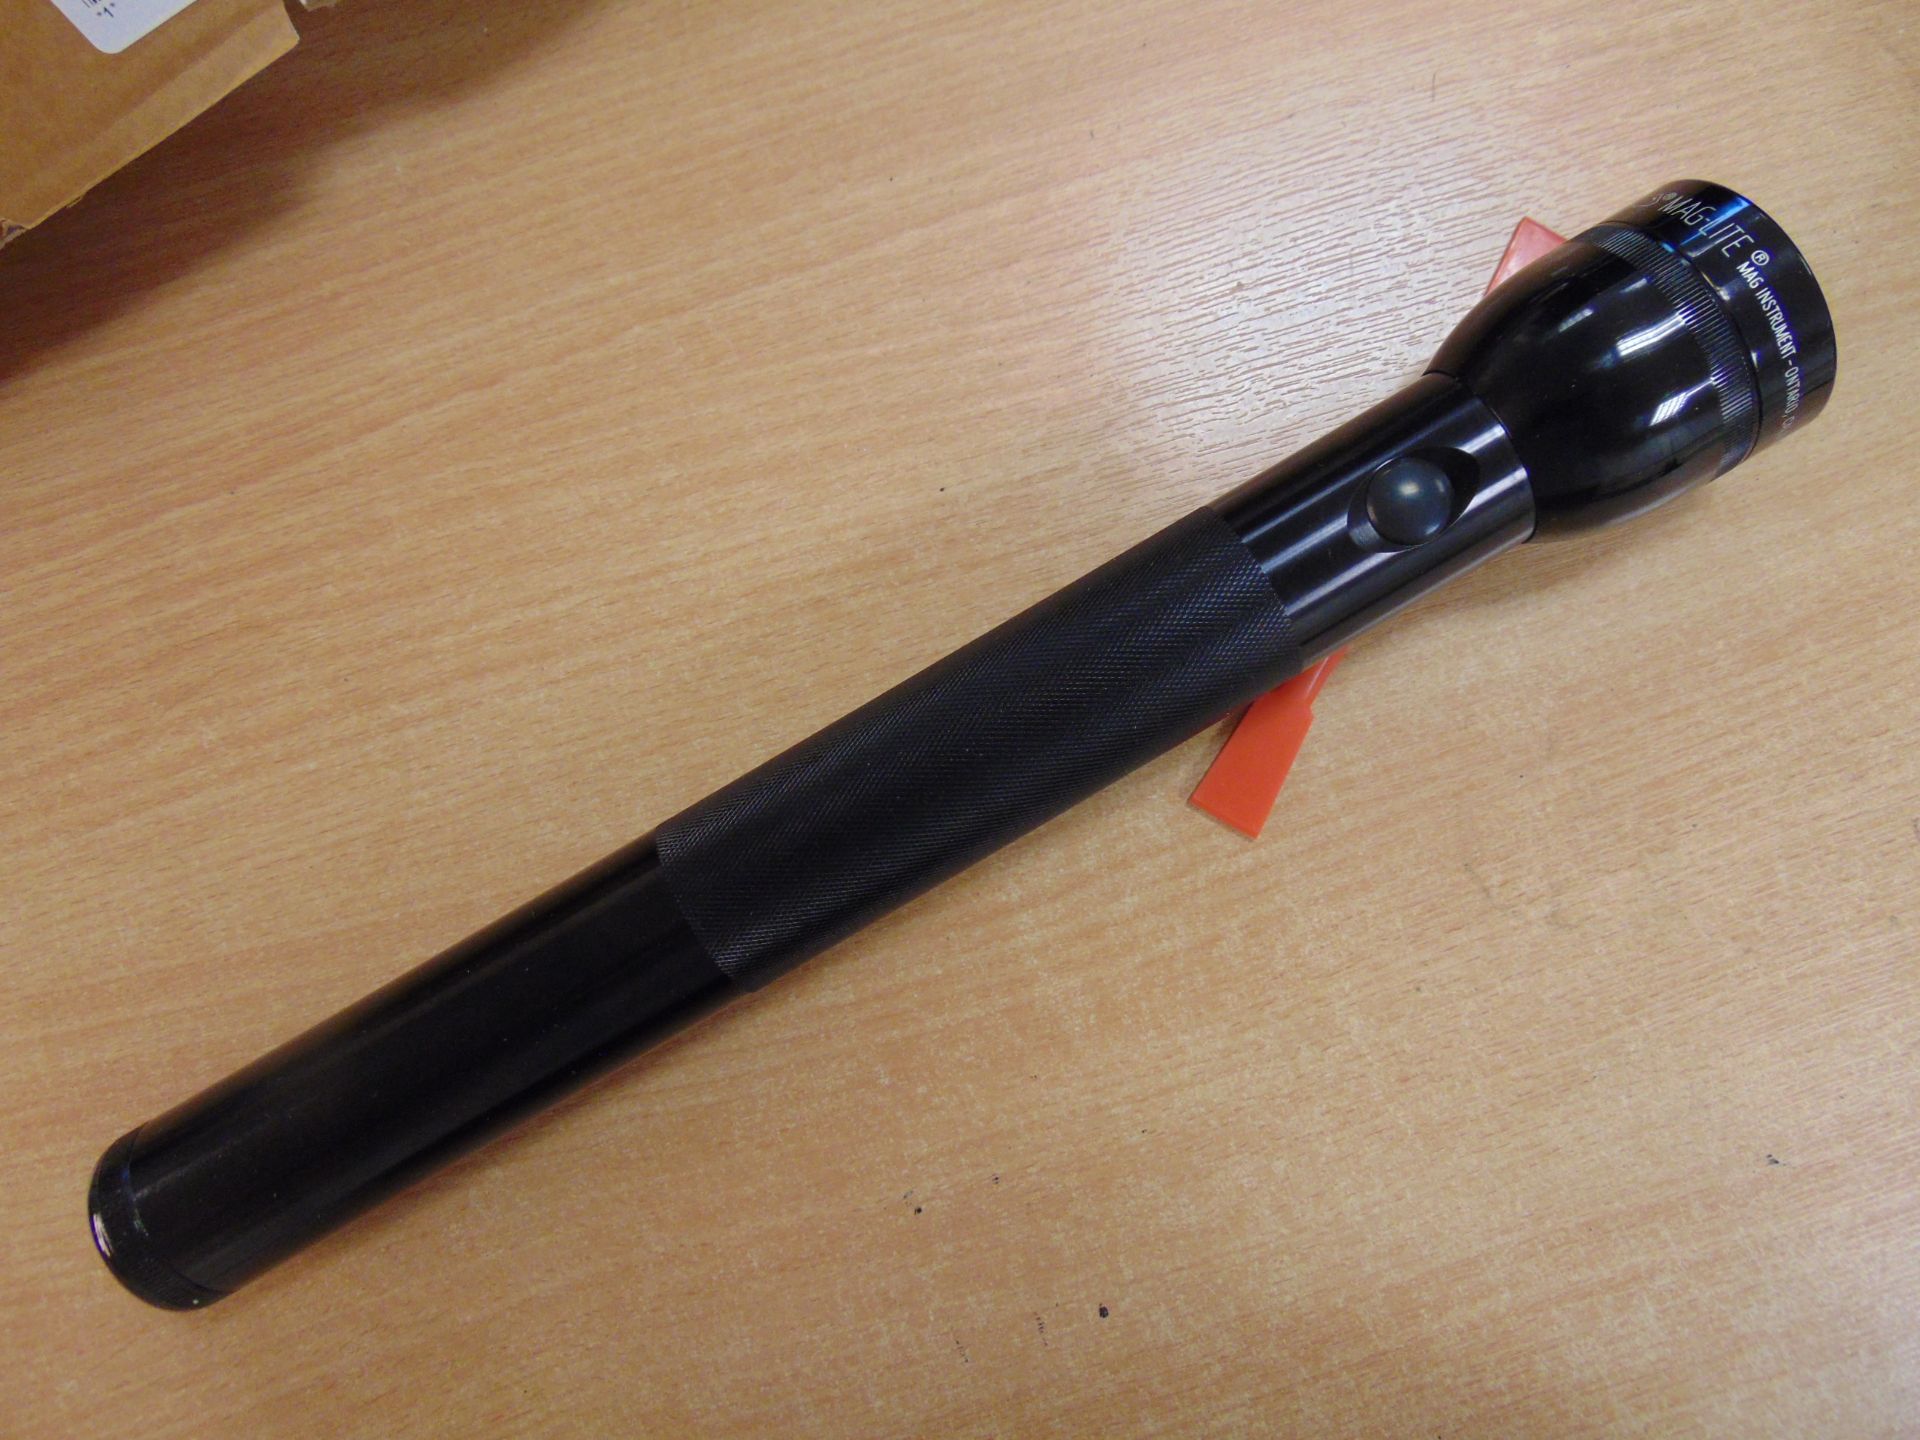 NEW UNISSUED MAGLITE TORCH BRITISH ARMY ISSUE - Image 3 of 5